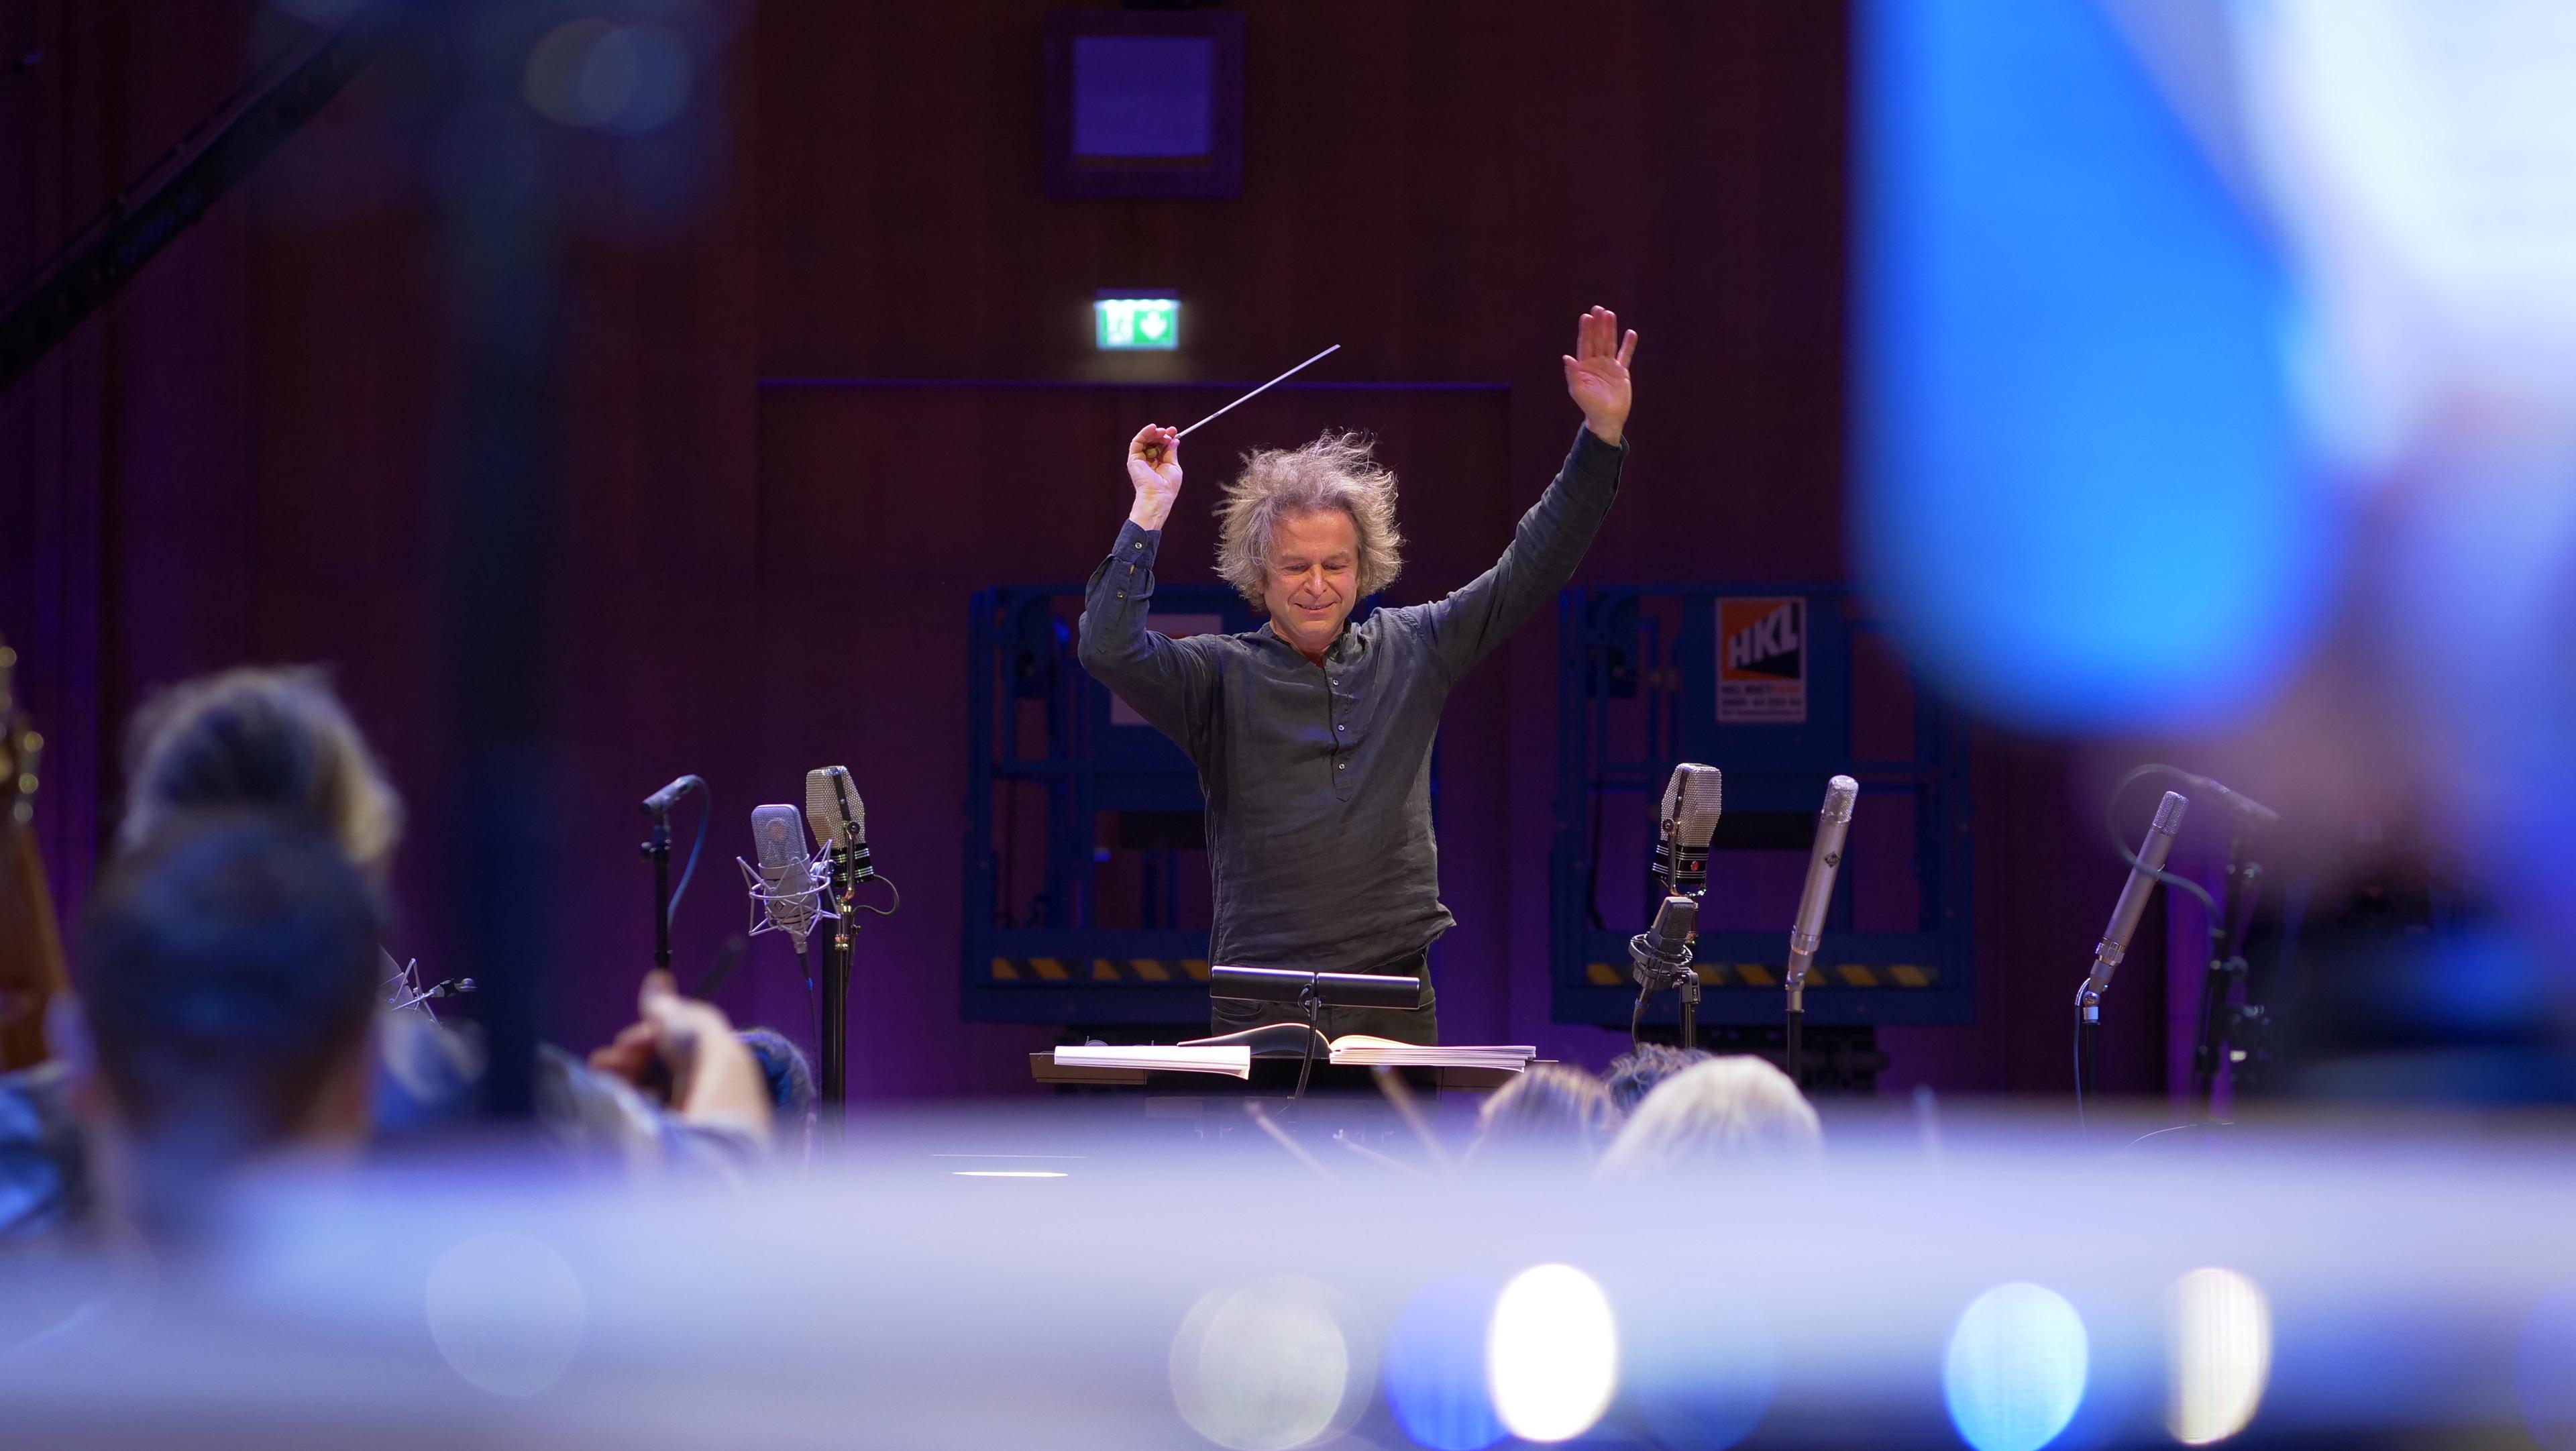 Johannes Vogel in full flow while conducting the Synchron Stage Orchestra